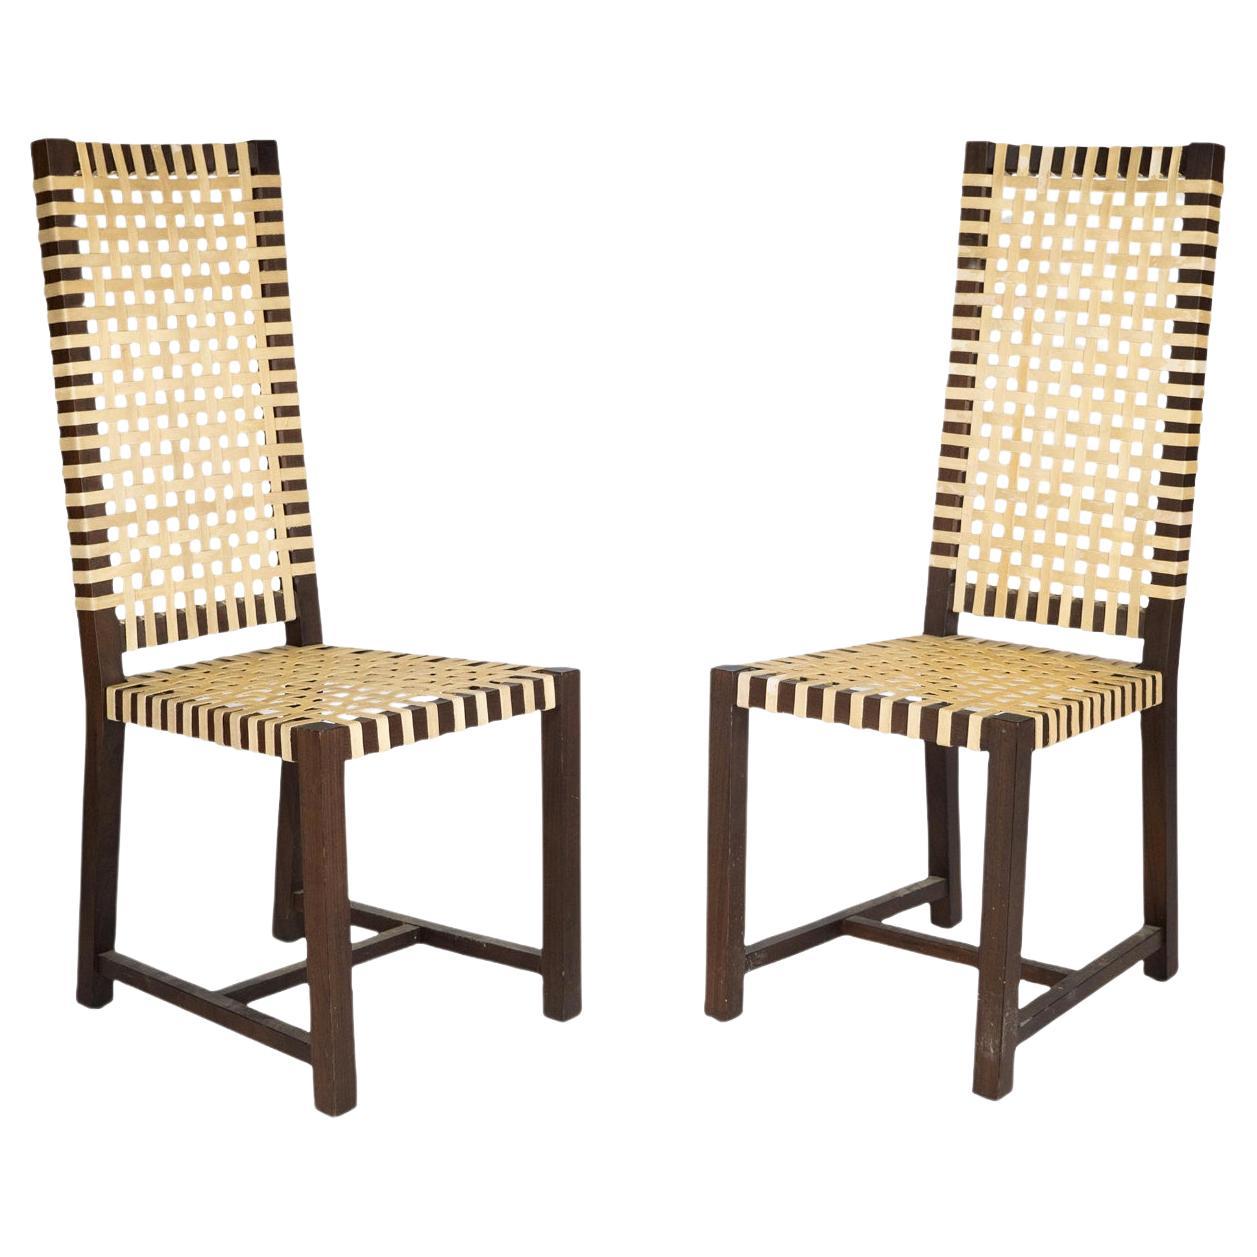 1980s Italian Architectural Otto 121' High Back Chairs by Paola Navone for Gerva